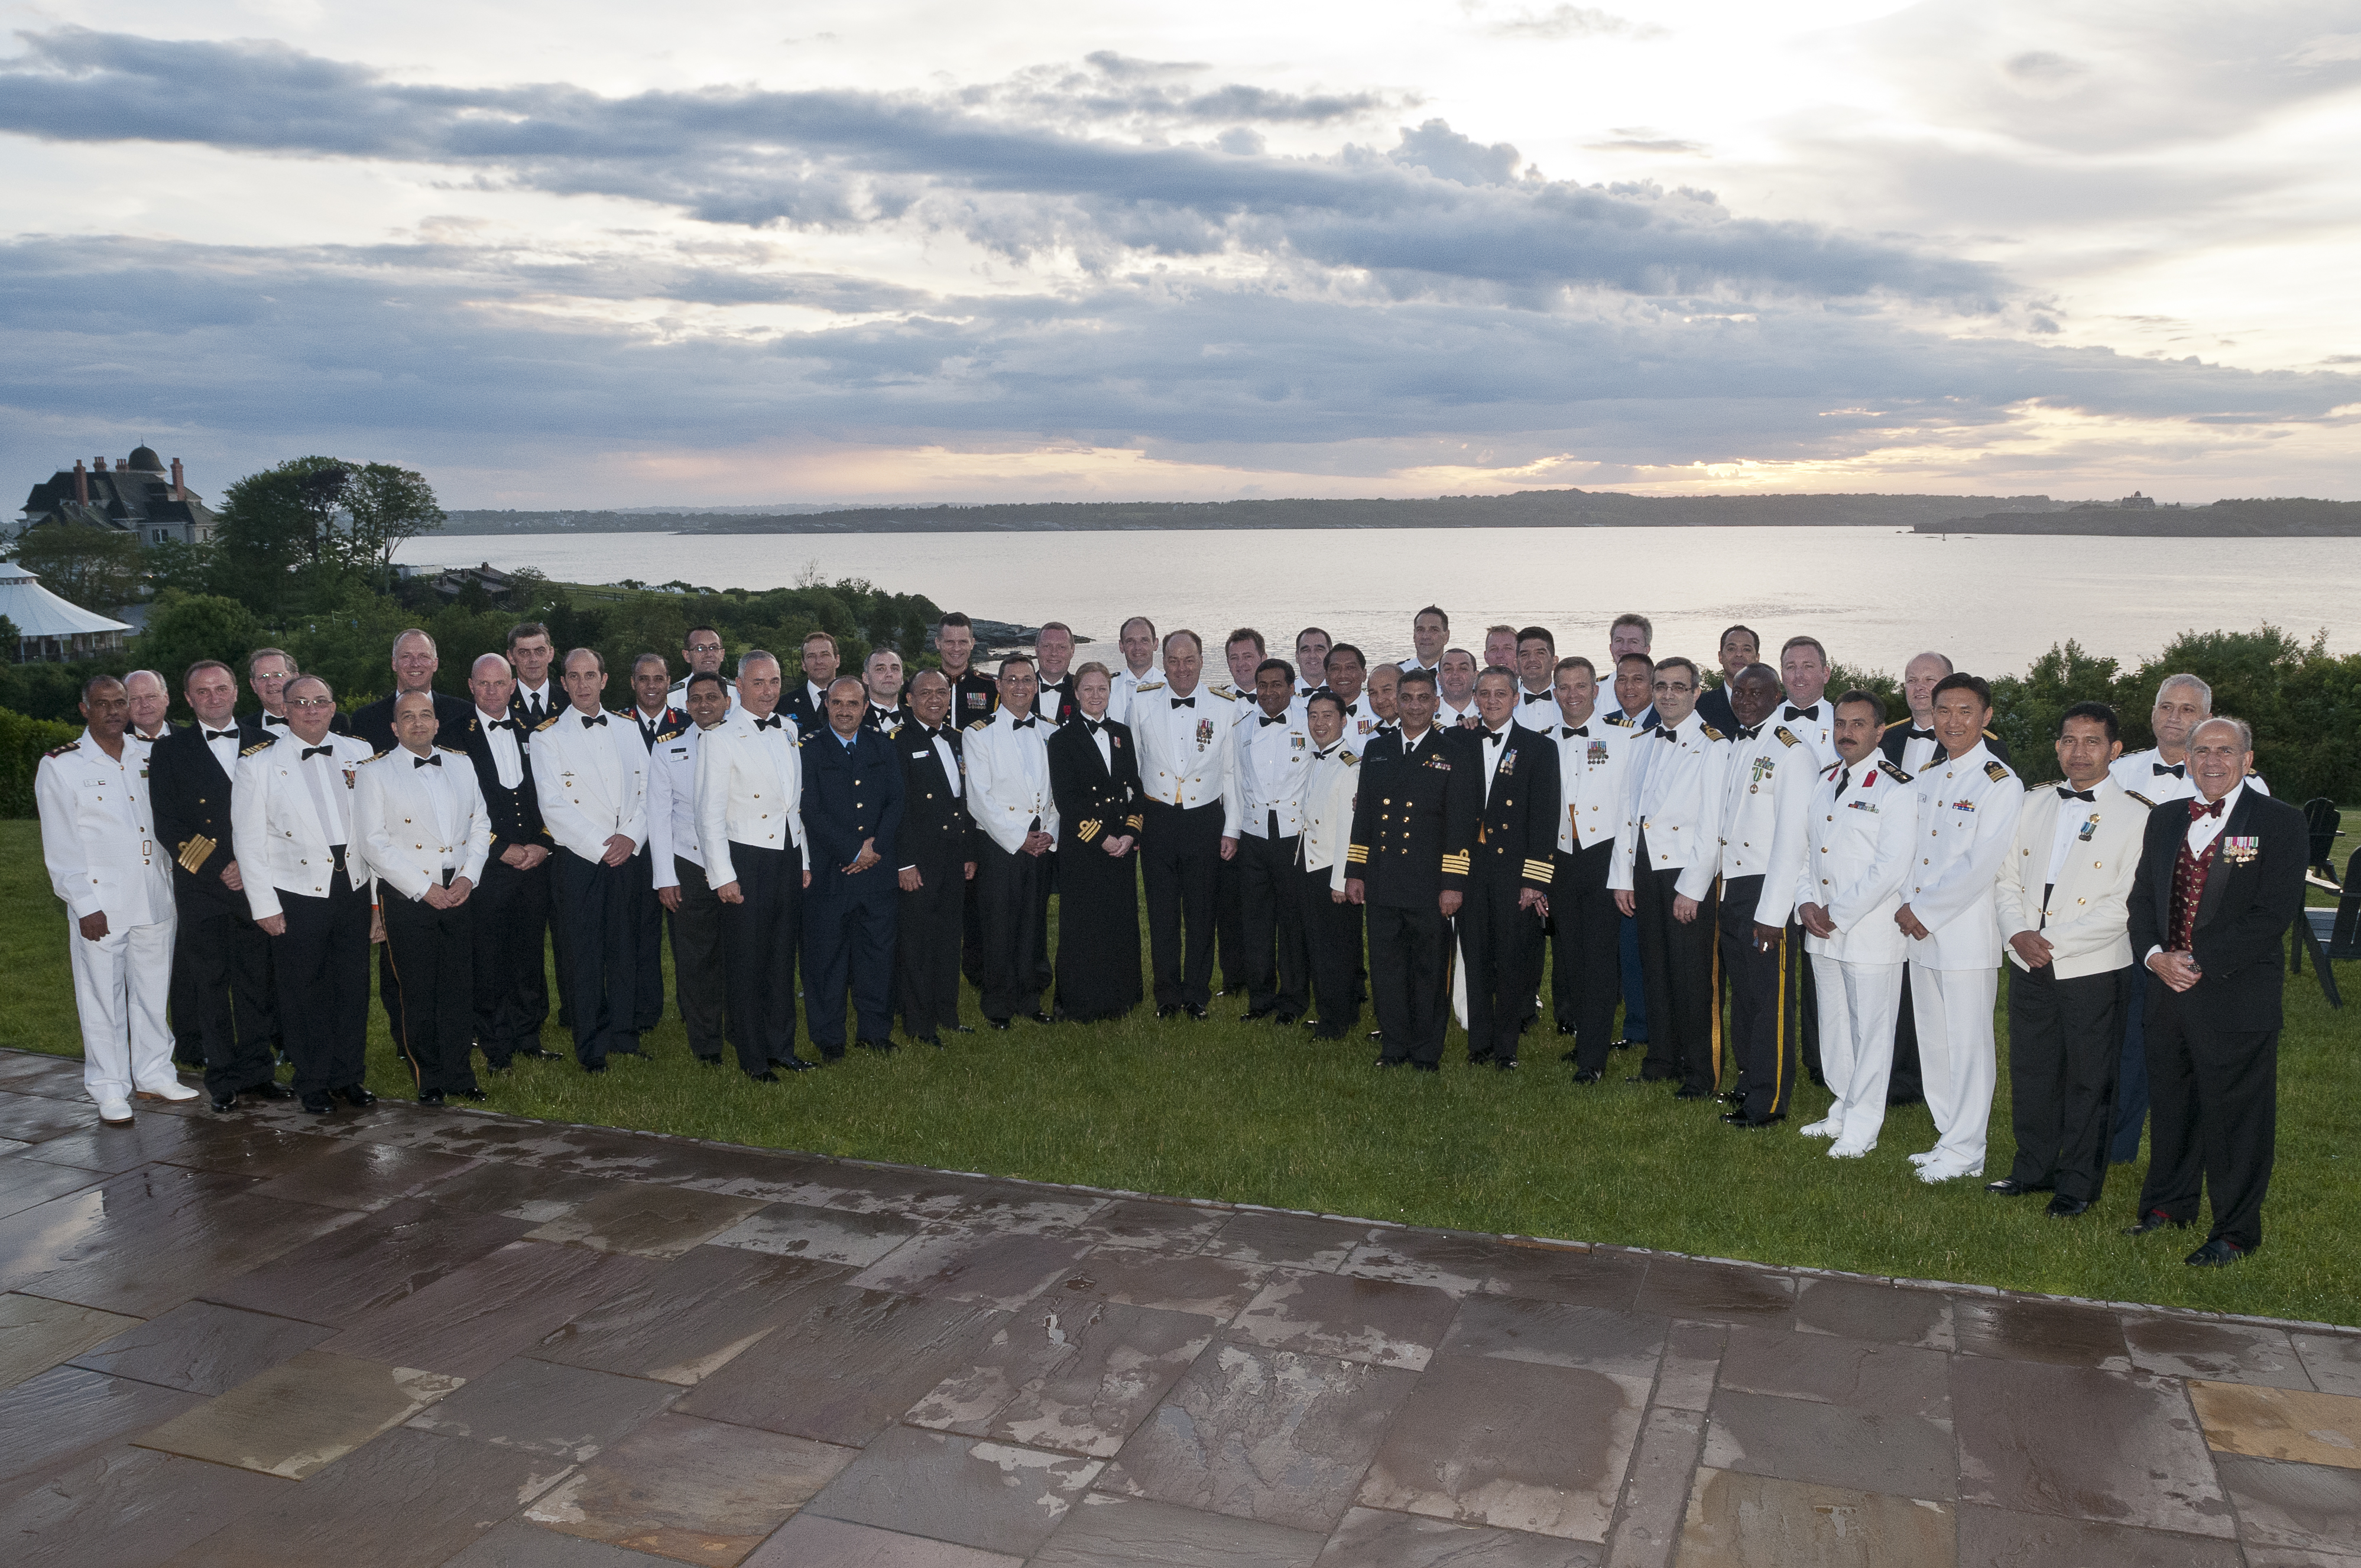 120607-N-LE393-006 NEWPORT, R.I. (June 7, 2012) Students from the Naval Command College at the U.S. Naval War College pose for a group photo during their graduation ball at the Ocean Cliff Hotel.(U.S. Navy photo by Mass Communication Specialist 2nd Class Eric Dietrich/Released)